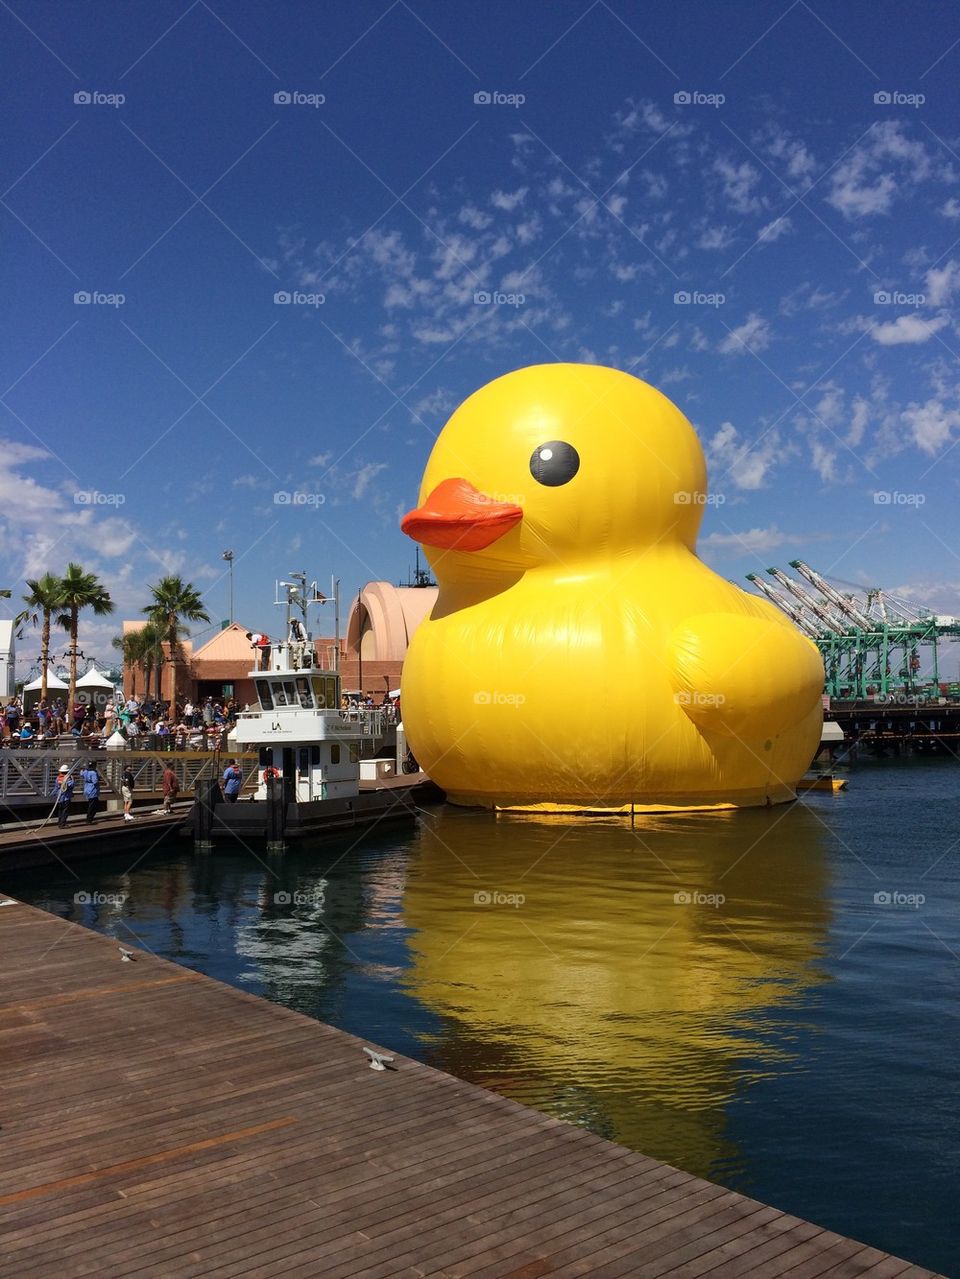 The Worlds Largest Rubber Duck